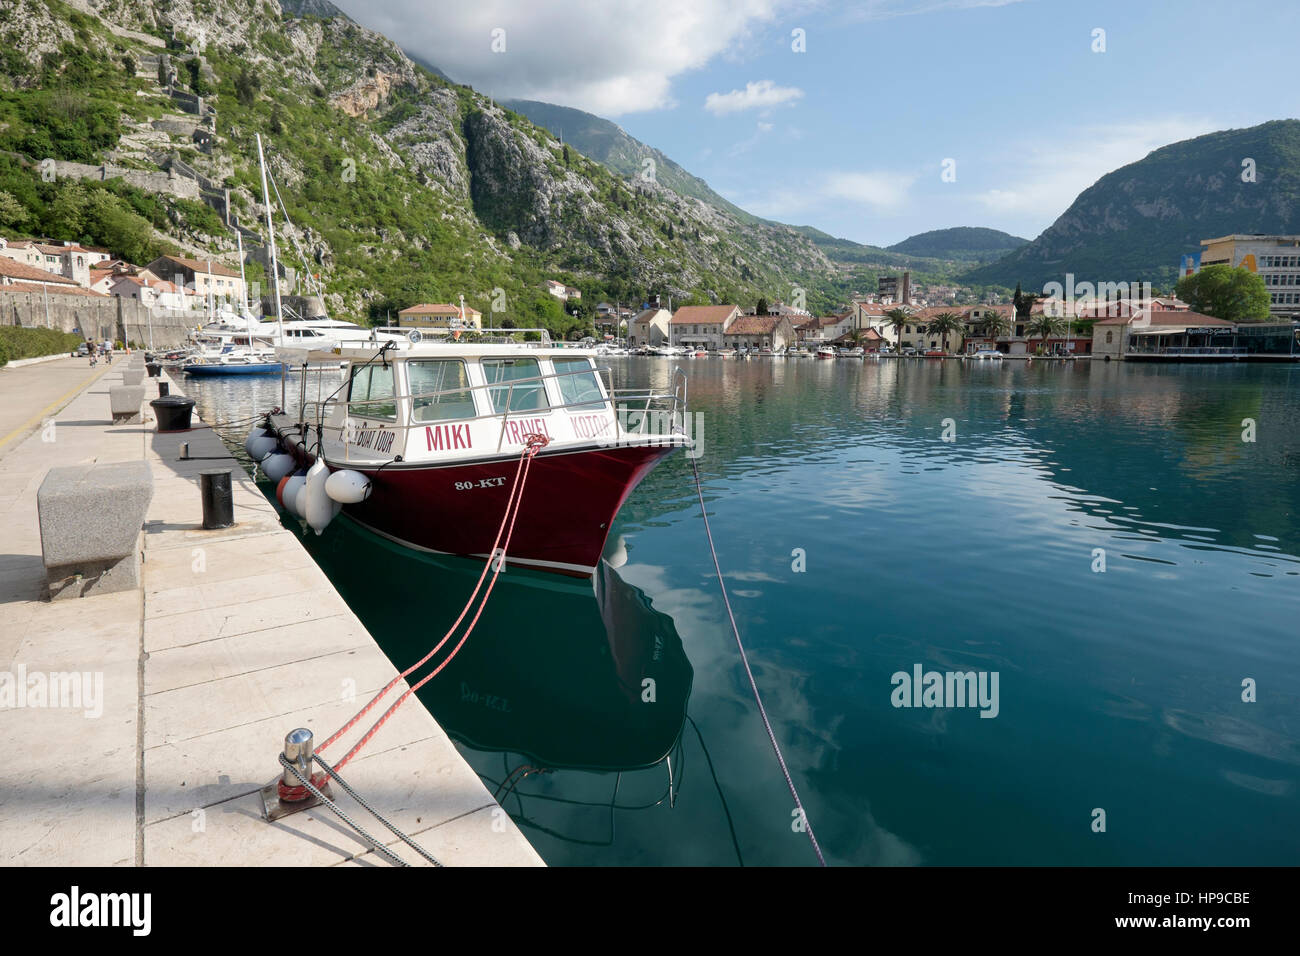 Tourist excursion boat moored at Kotor, Montenegro Stock Photo